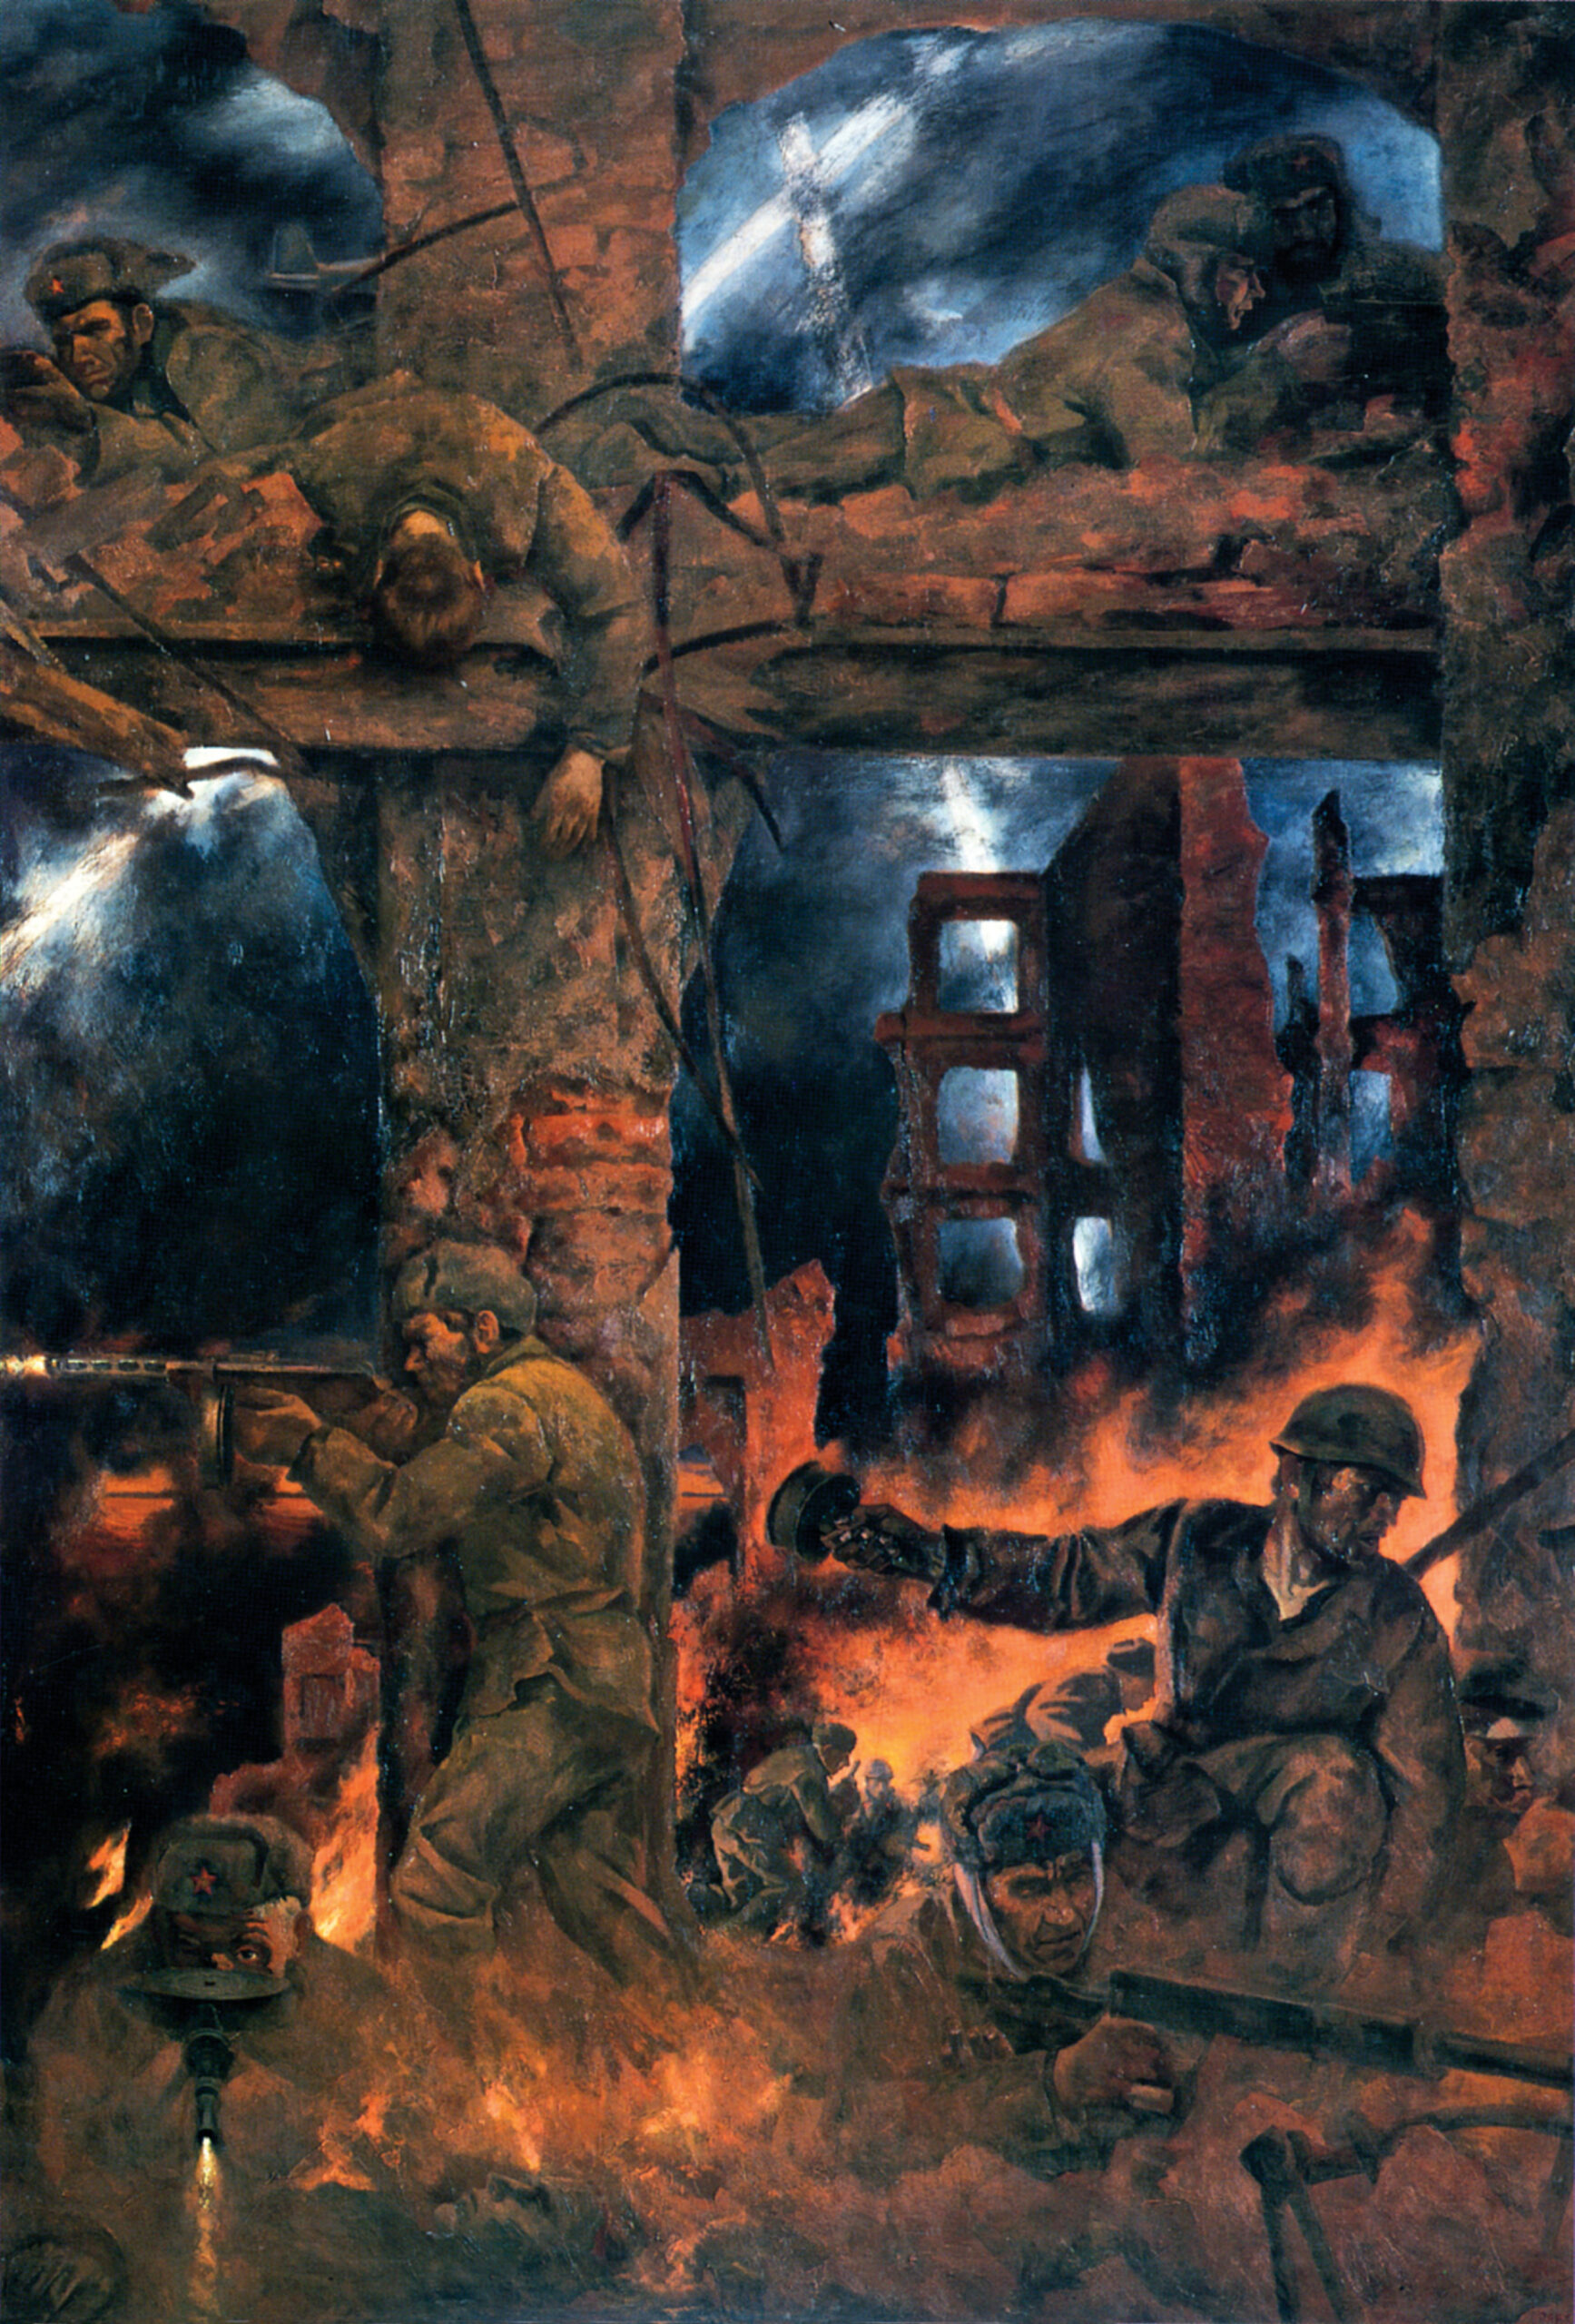 Self-sacrificial Russian soldiers literally martyr themselves on the cross in this heroic painting, Stalingrad, by Soviet artist Boris Ugarov.